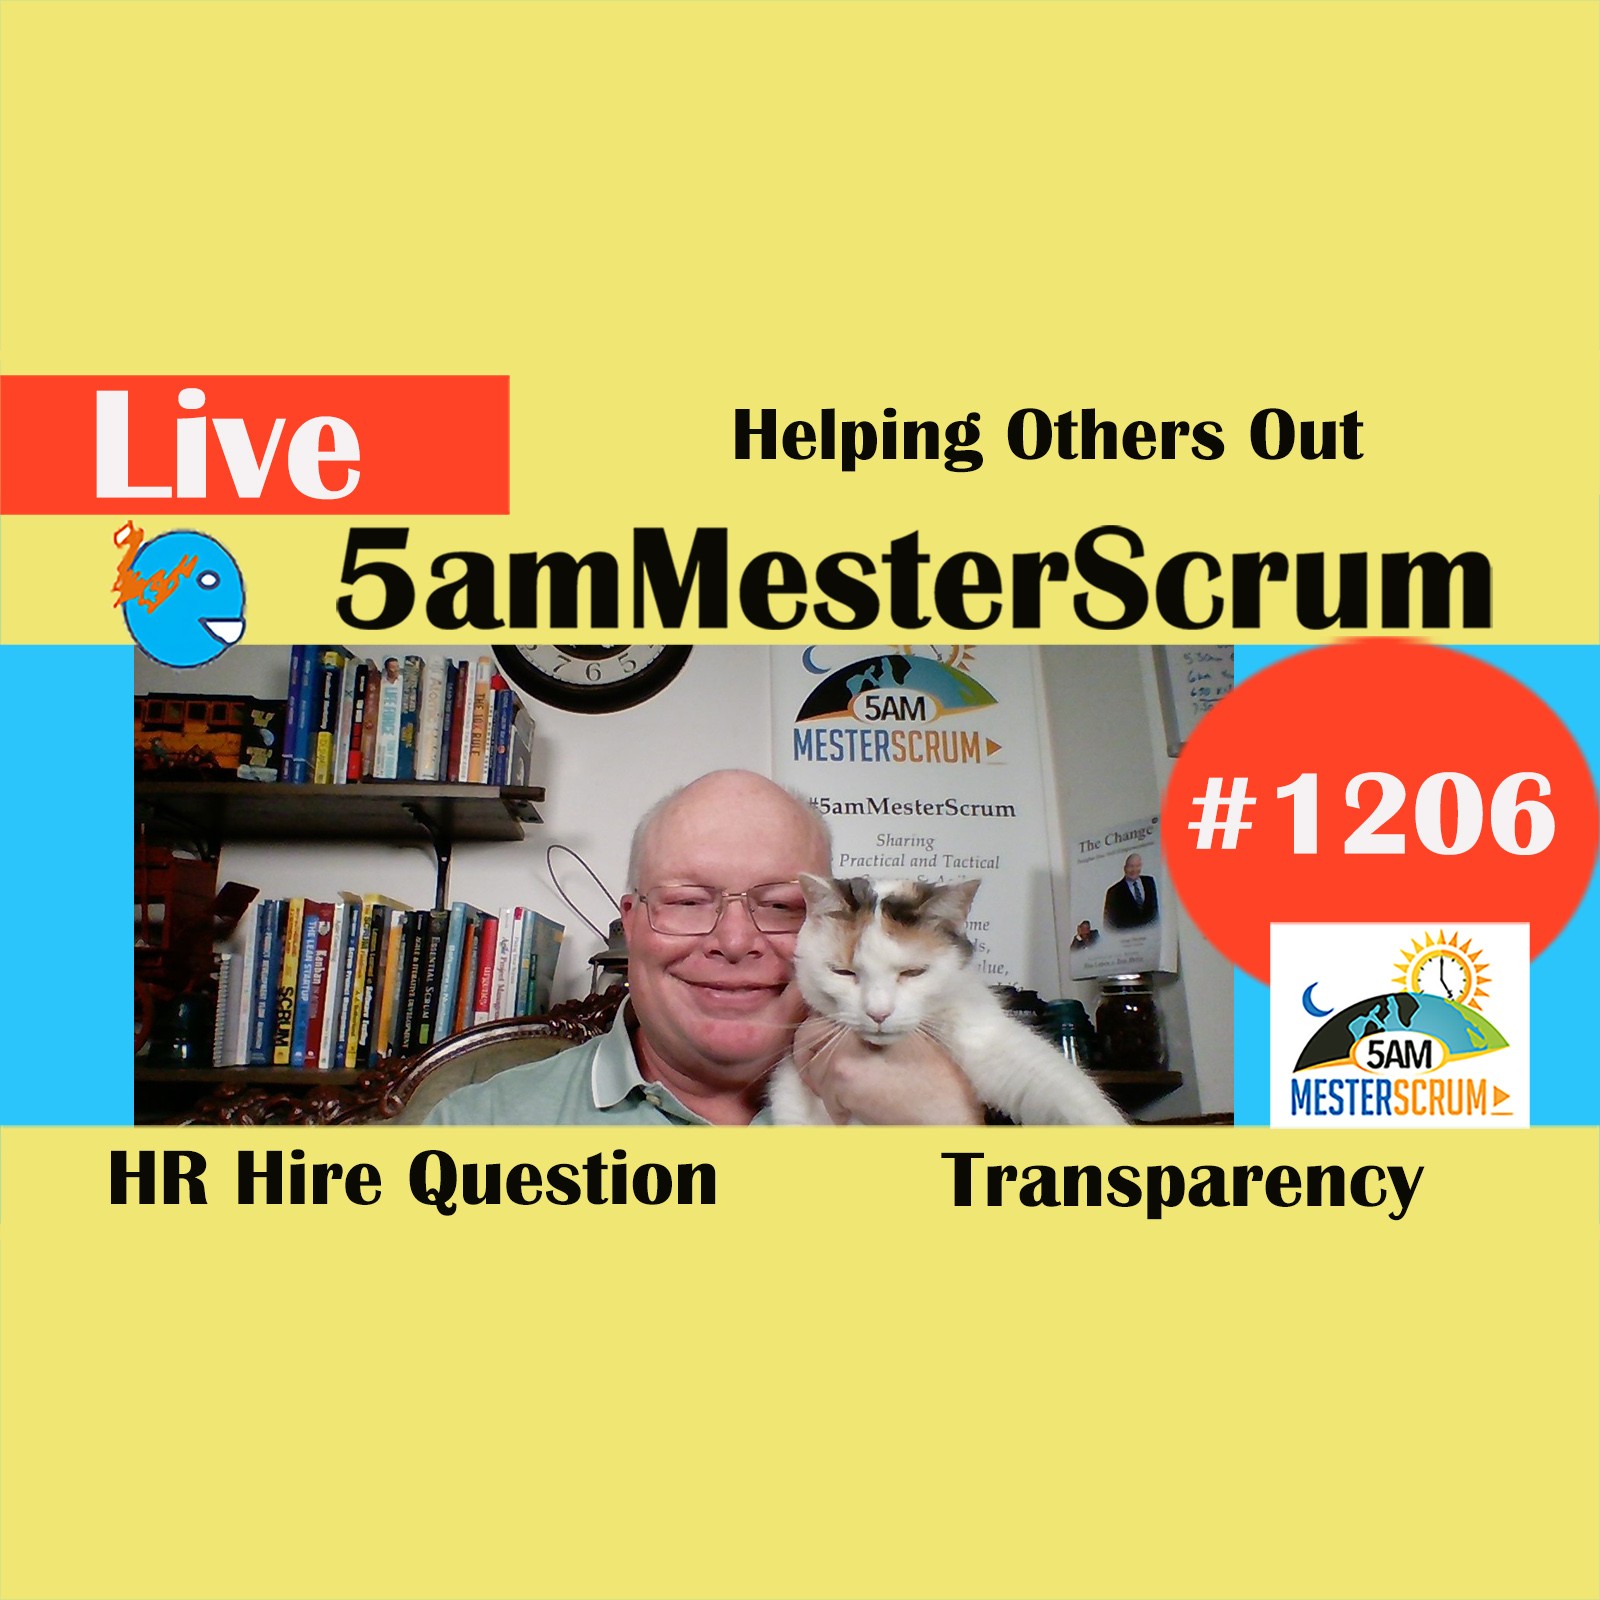 Helping Others Out Lightning Talk 1206 #5amMesterScrum LIVE #scrum #agile